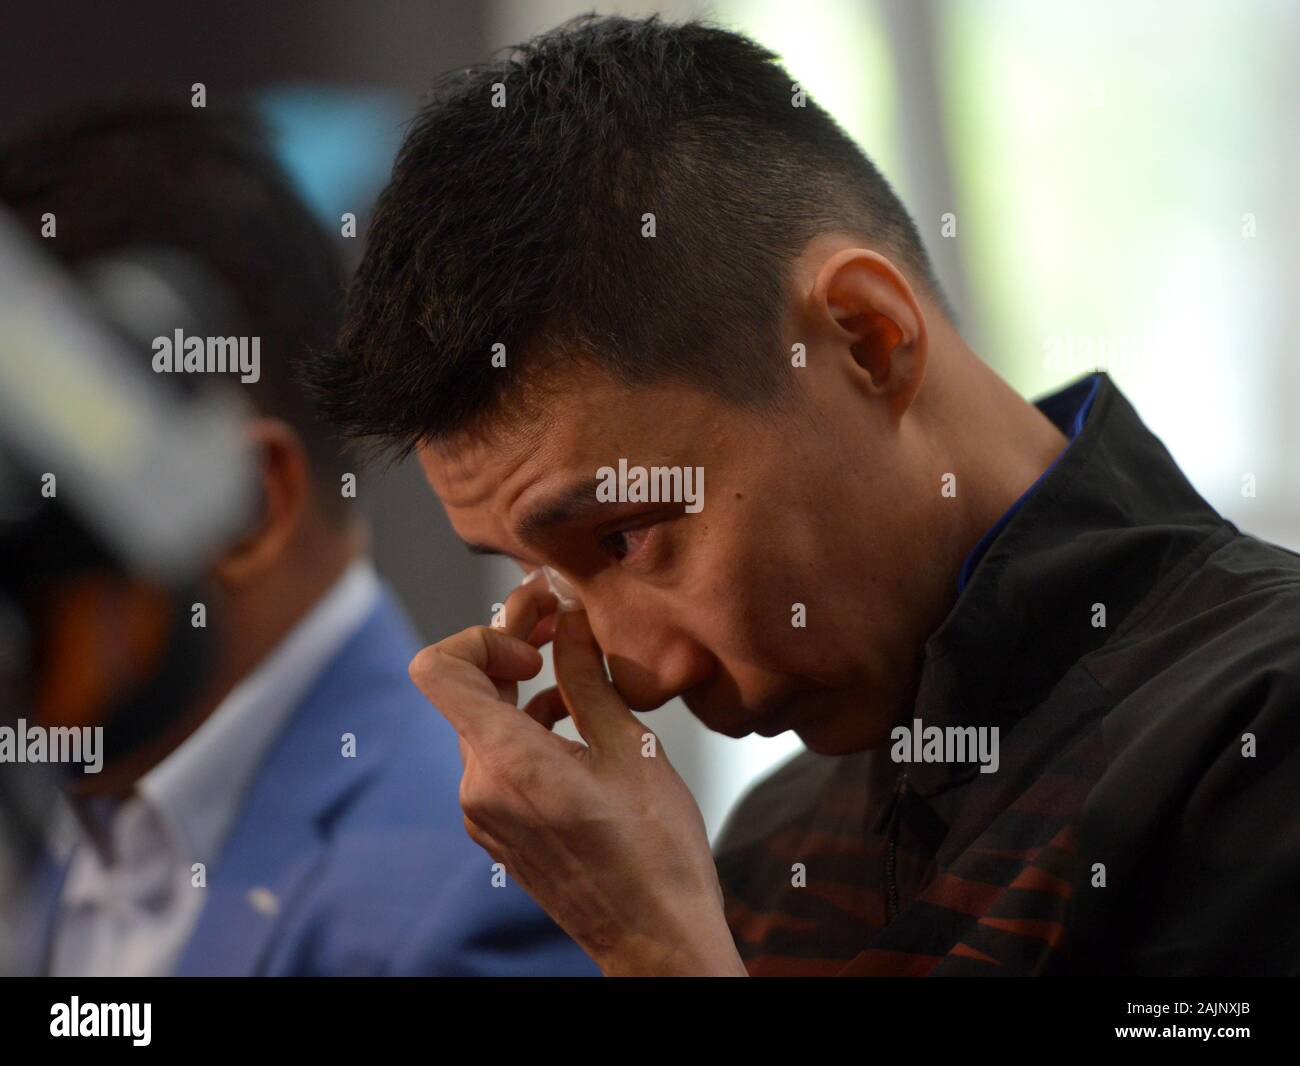 Beijing, Malaysia. 13th June, 2019. Malaysia's badminton player Lee Chong Wei reacts during a news conference to announce his retirement in Putrajaya, Malaysia, June 13, 2019. Credit: Chong Voon Chung/Xinhua/Alamy Live News Stock Photo